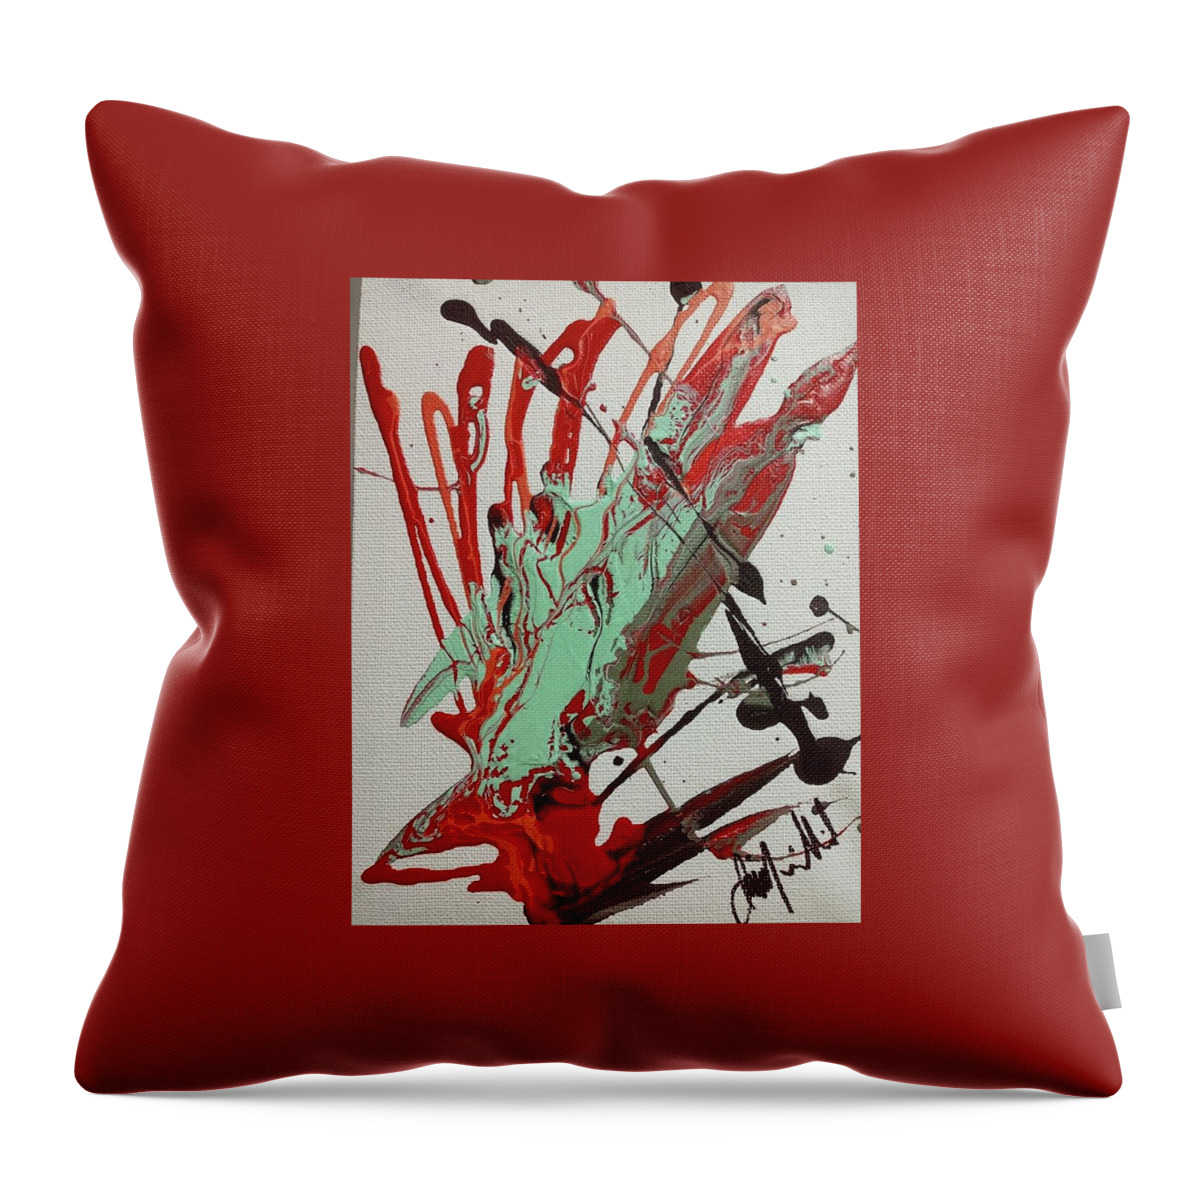  Throw Pillow featuring the painting Straight by Jimmy Williams